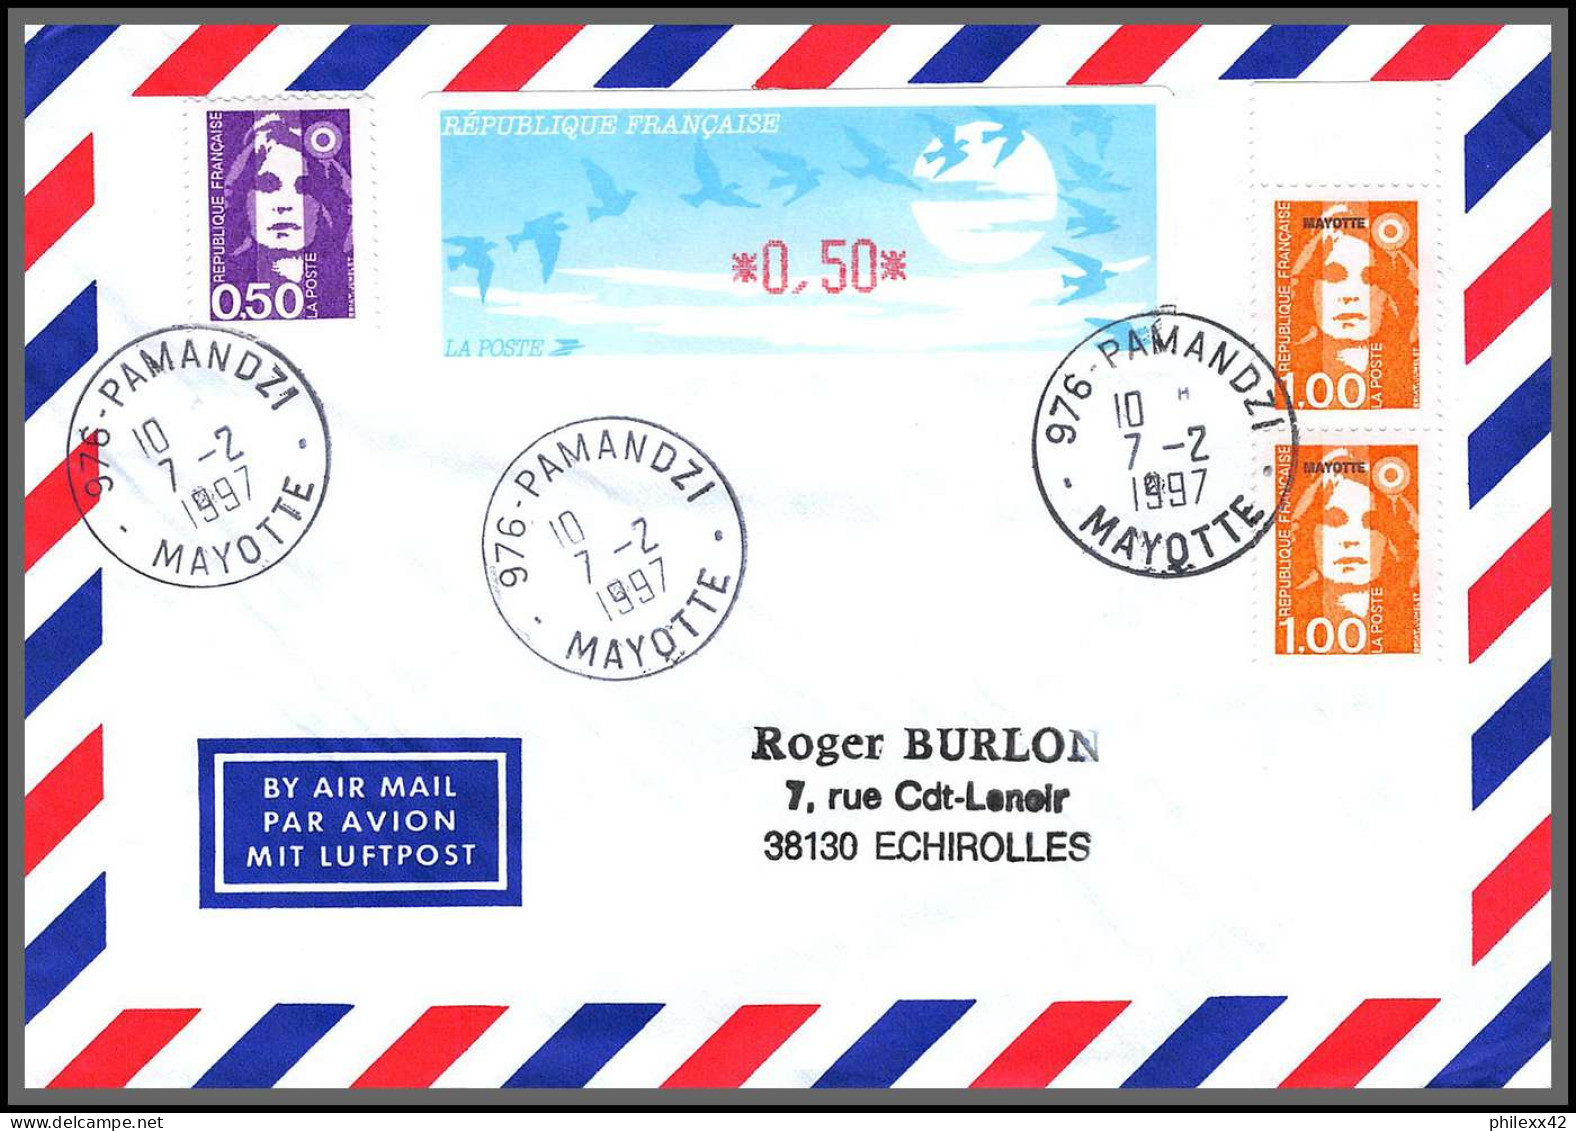 74131 Mixte Atm Marianne Bicentenaire 7/2/1997 Pamandzi Mayotte Echirolles Isère Lettre Cover Colonies  - Covers & Documents